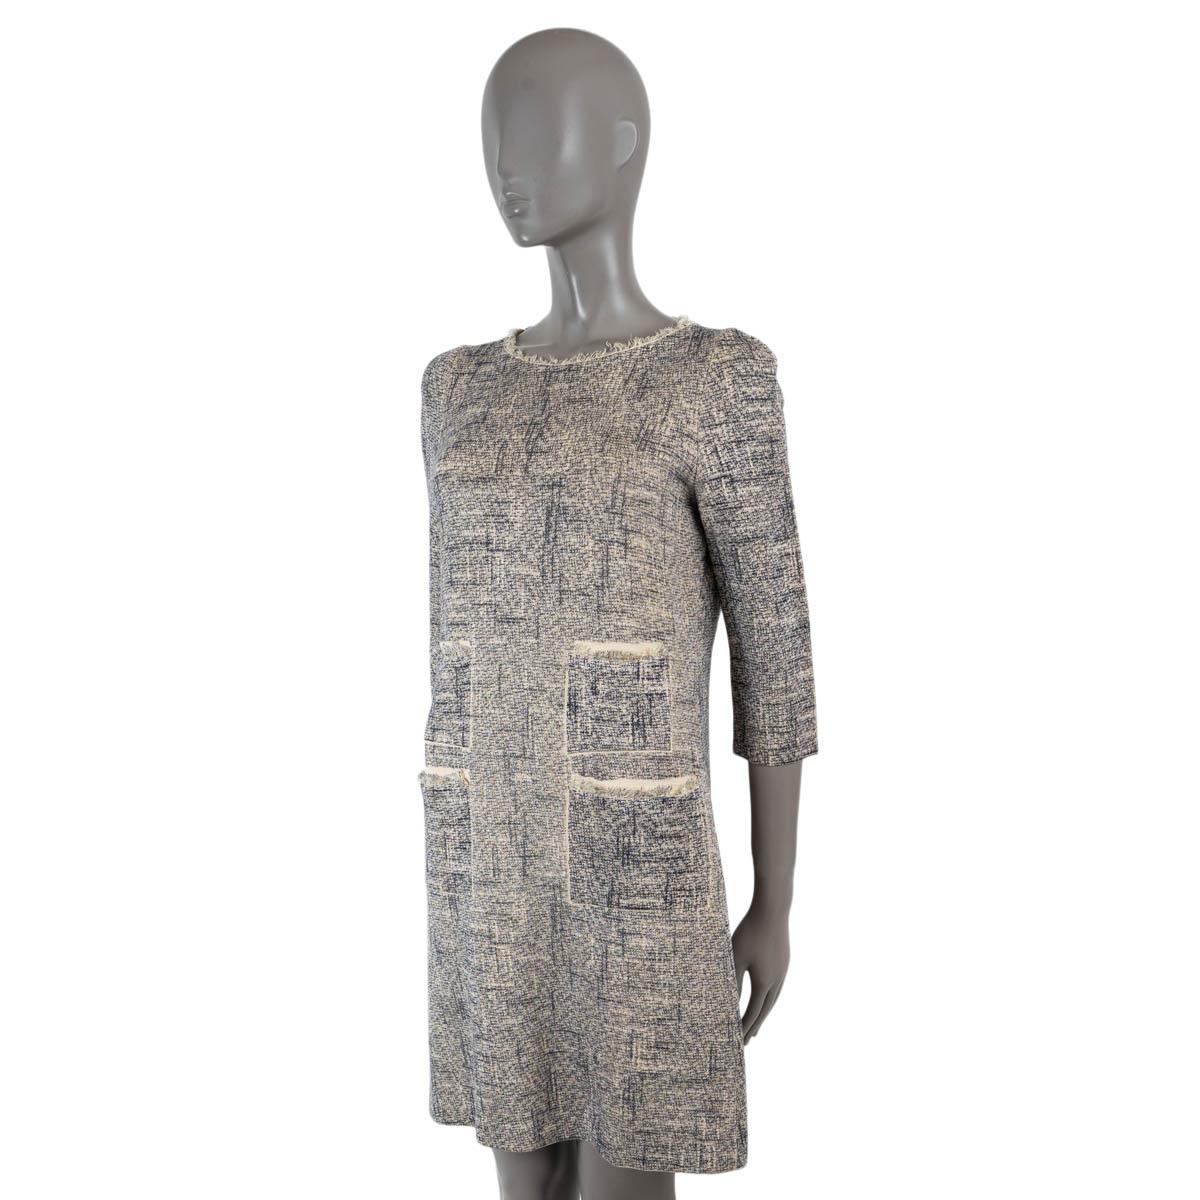 100% authentic Louis Vuitton knit dress in navy blue and white cotton (52%), silk (34%), polyamide (8%), tussah silk (5%) and elastane (1%). Features a round neck, four pockets and frayed edges. Unlined. Has been worn and is in excellent